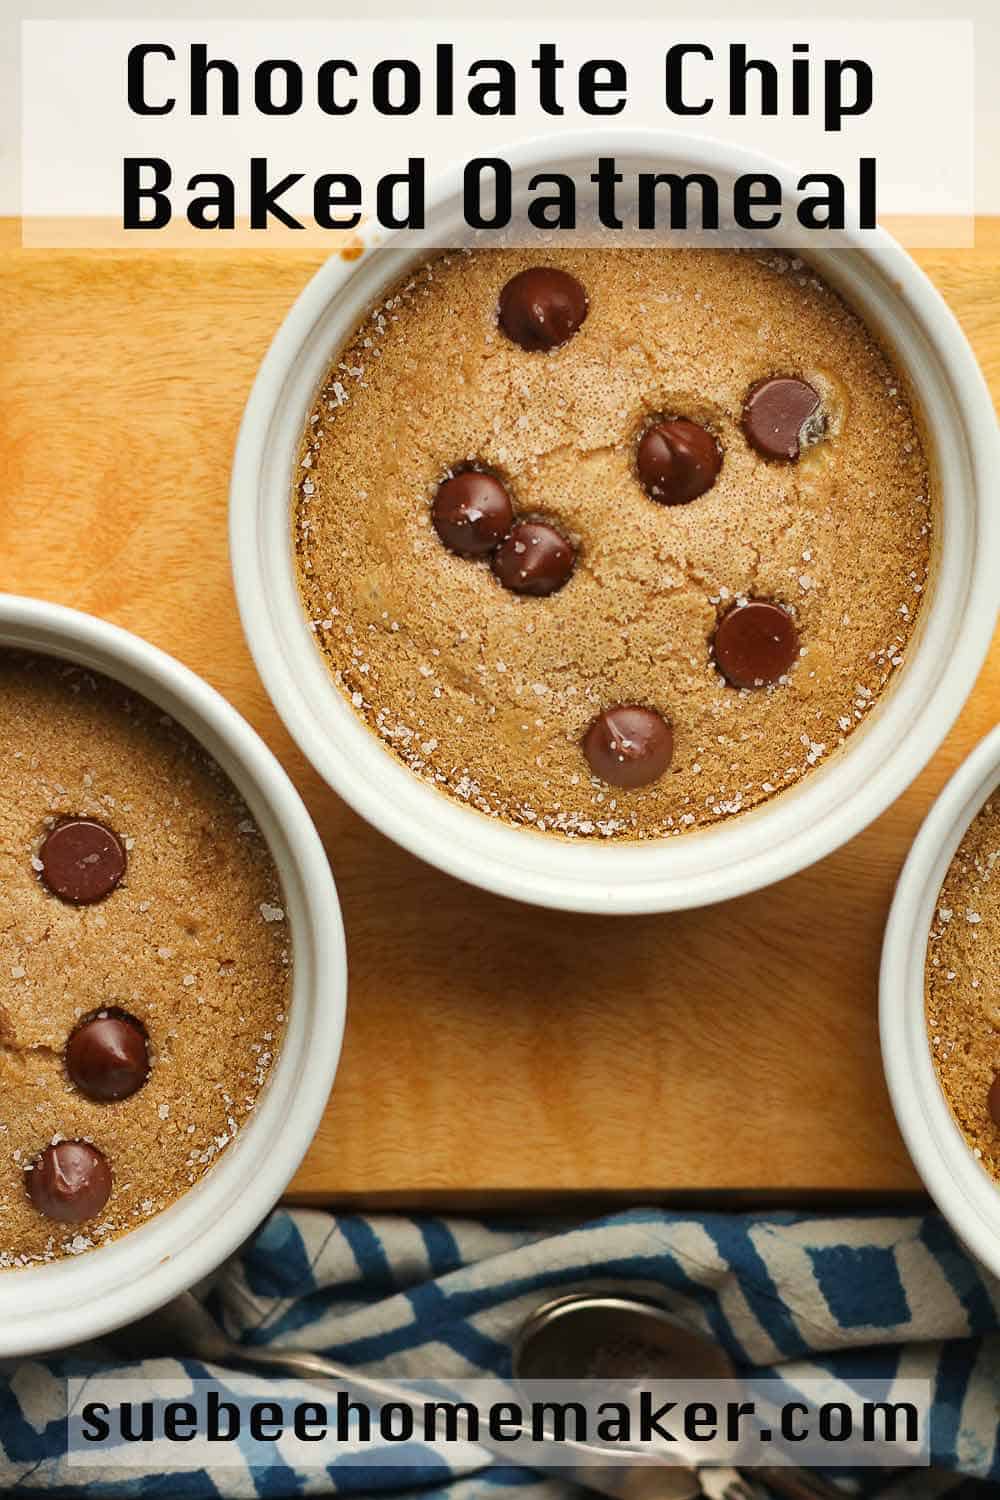 Bowls of chocolate chip baked oatmeal.